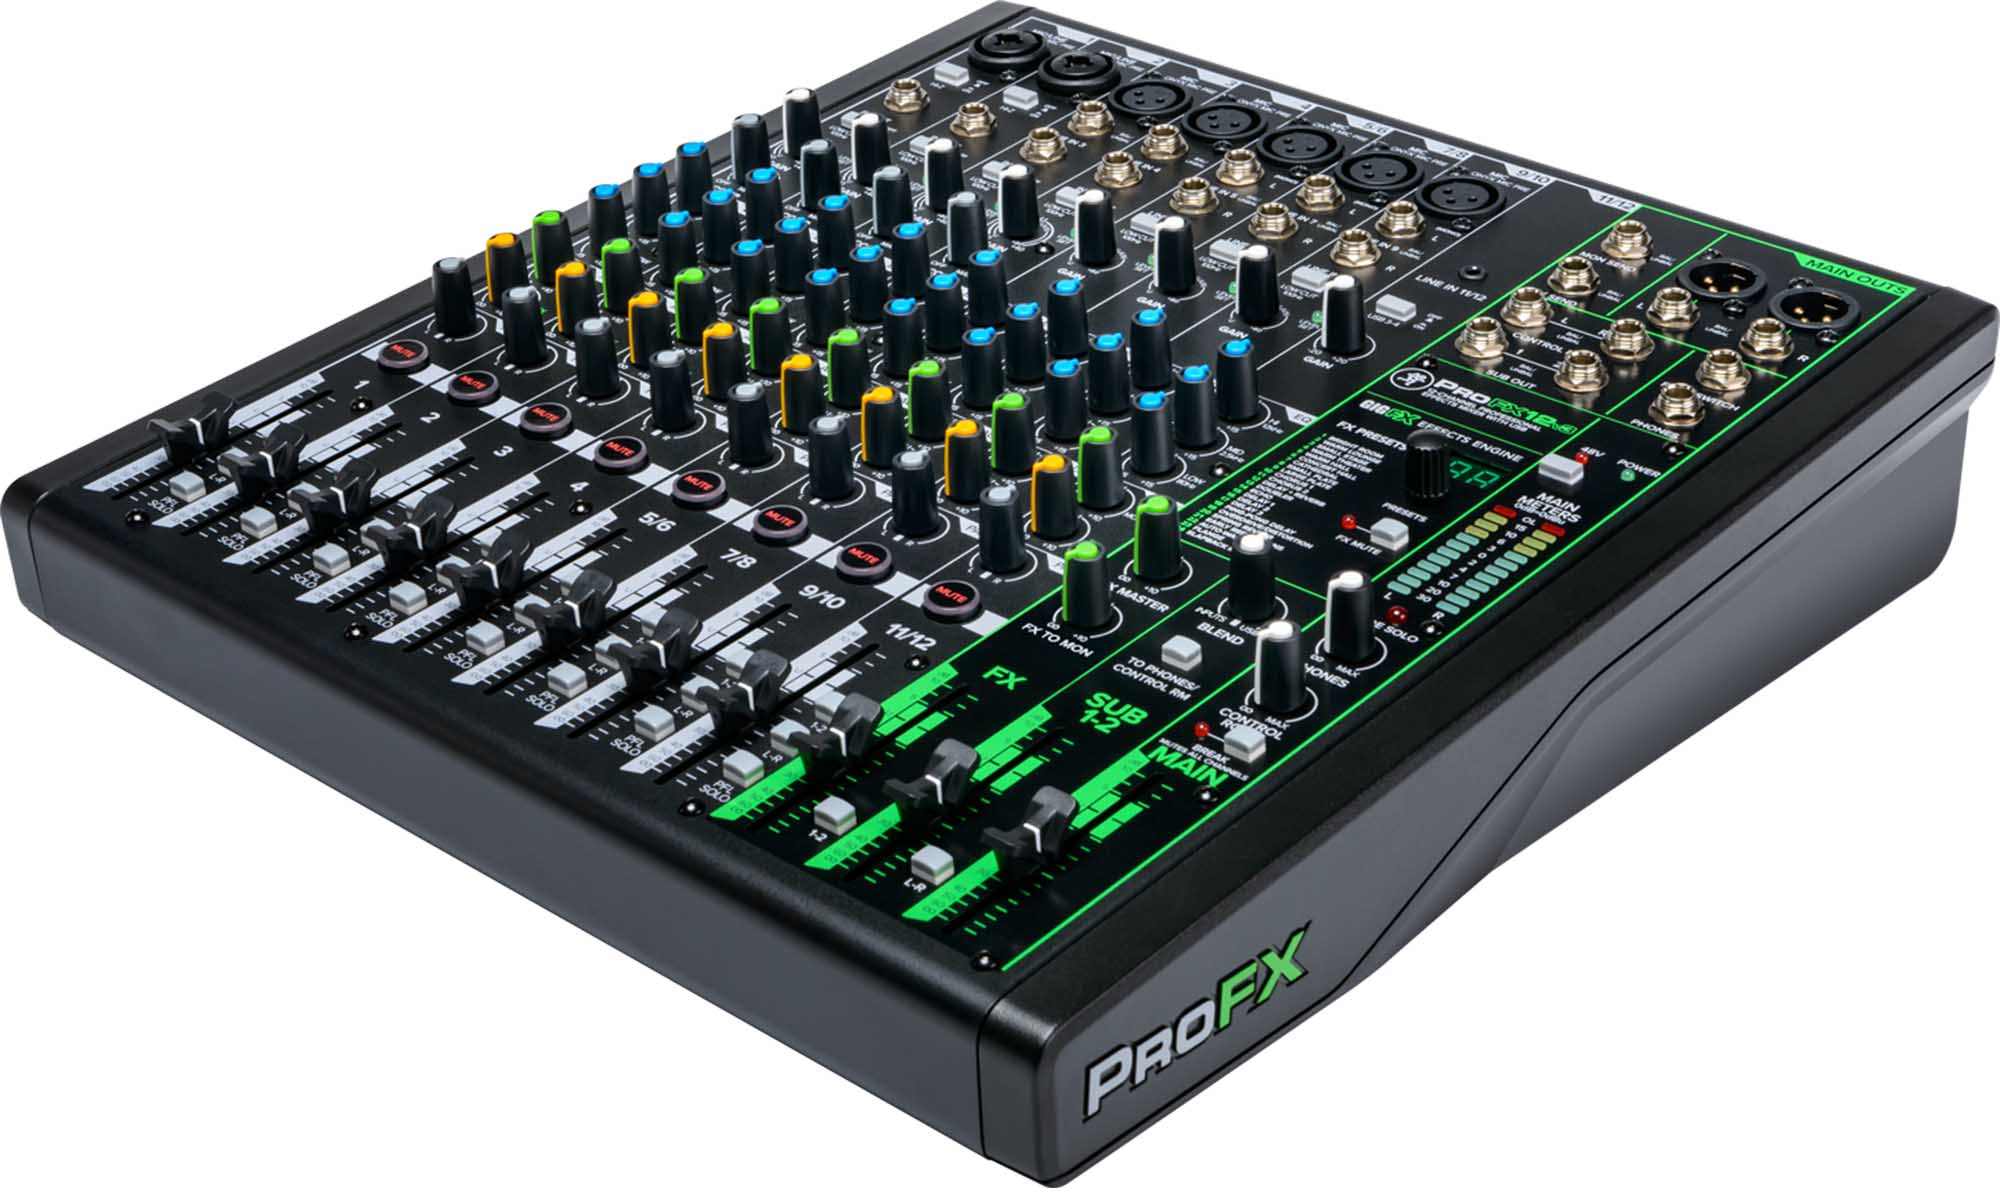 Mackie ProFX12v3, 12-Channel Professional Effects Mixer with Built-In FX - Hollywood DJ